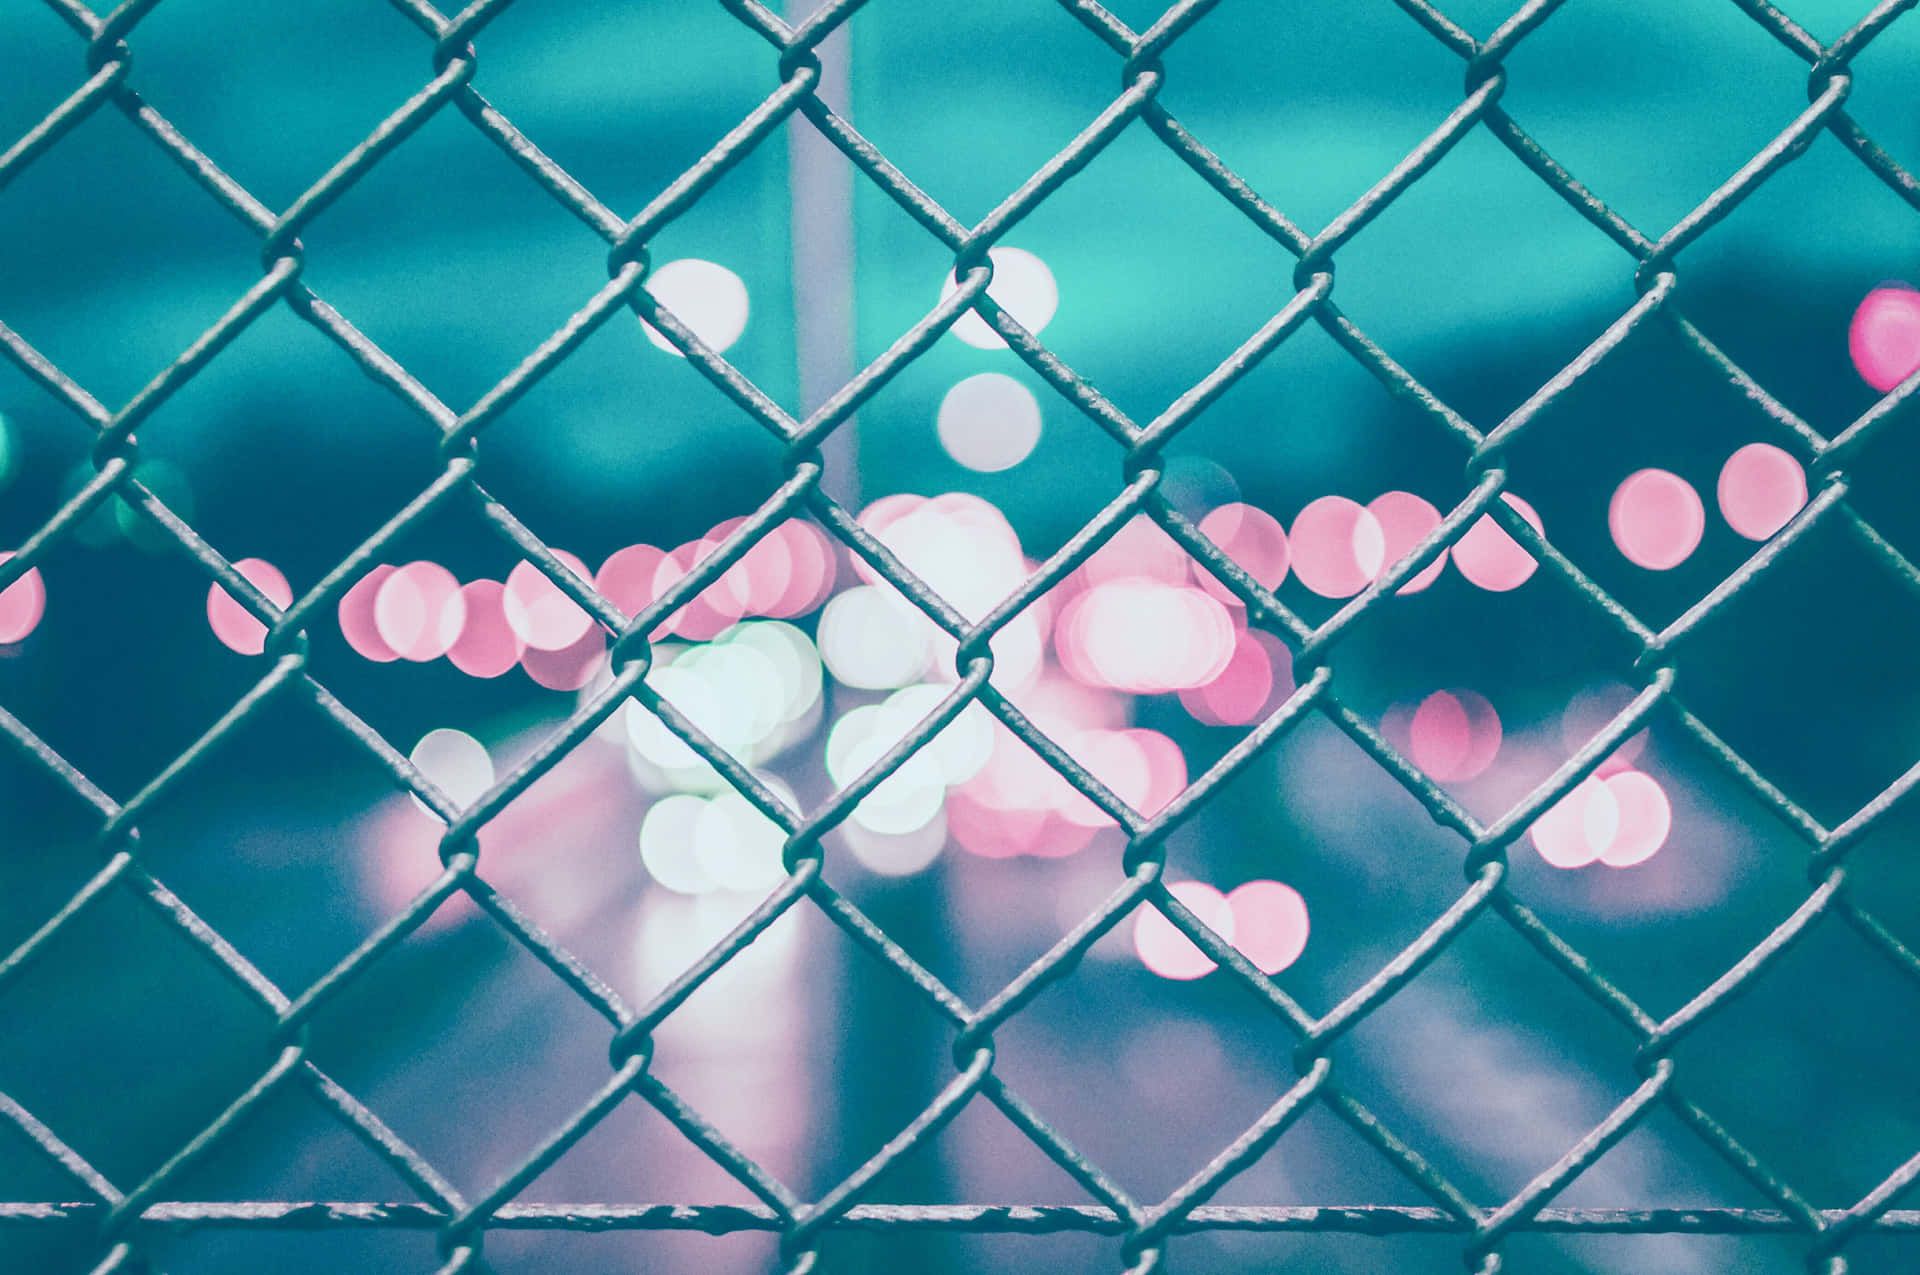 A chain link fence with bokeh lights in the background. - Cyan